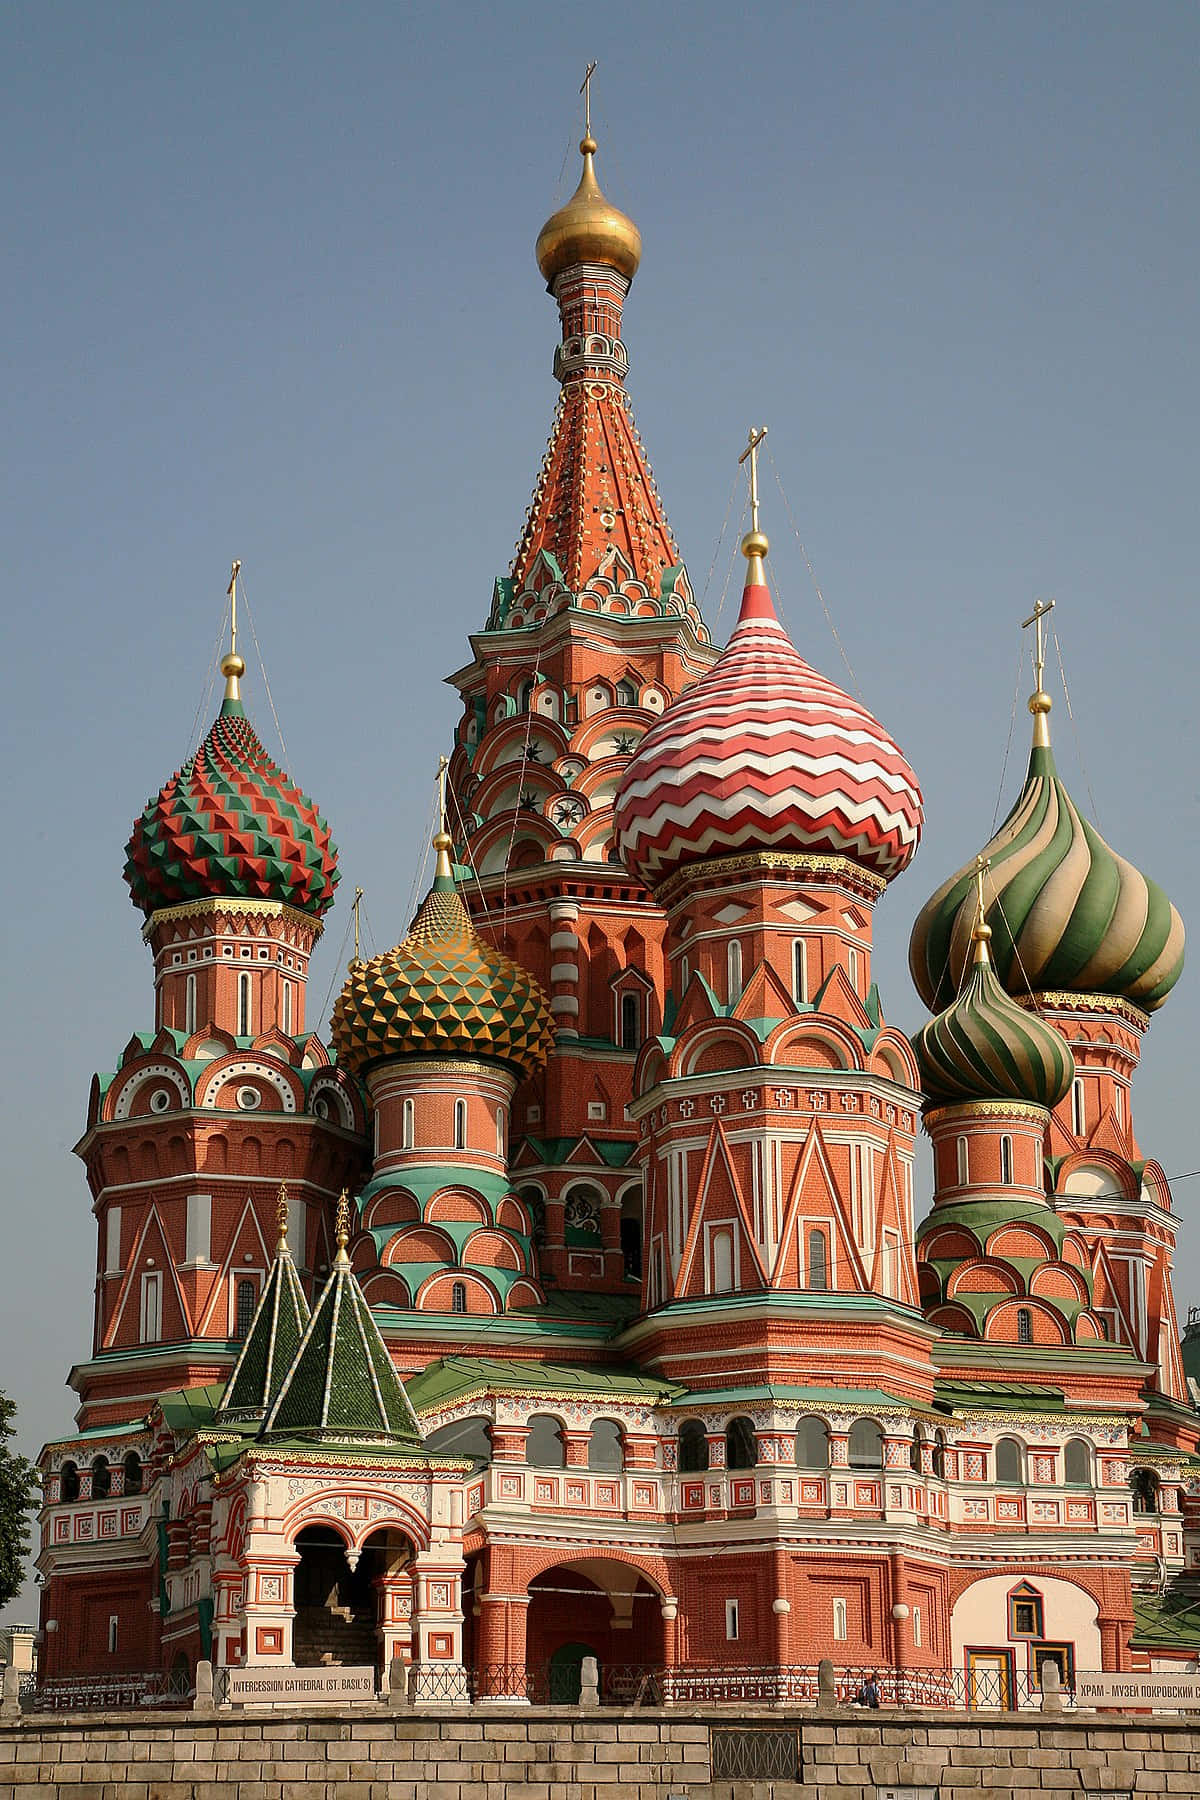 Majestic view of Saint Basil's Cathedral with intricate tented roof steeples Wallpaper